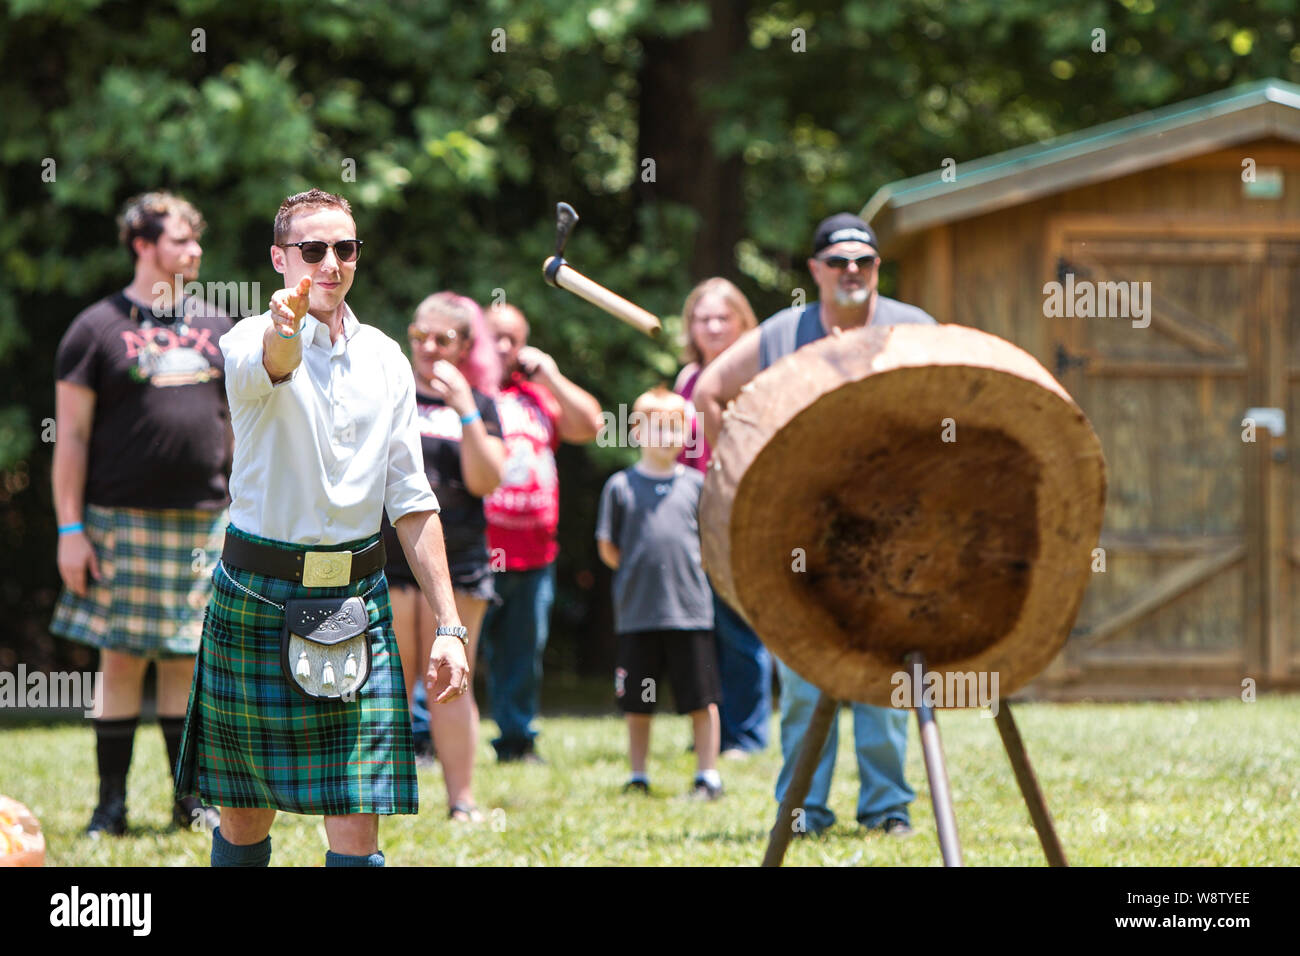 A man throws a hatchet at a wood target in an axe throwing exhibition  at the Blairsville Scottish Highland Games on June 9, 2018 in Blairsville, GA. Stock Photo